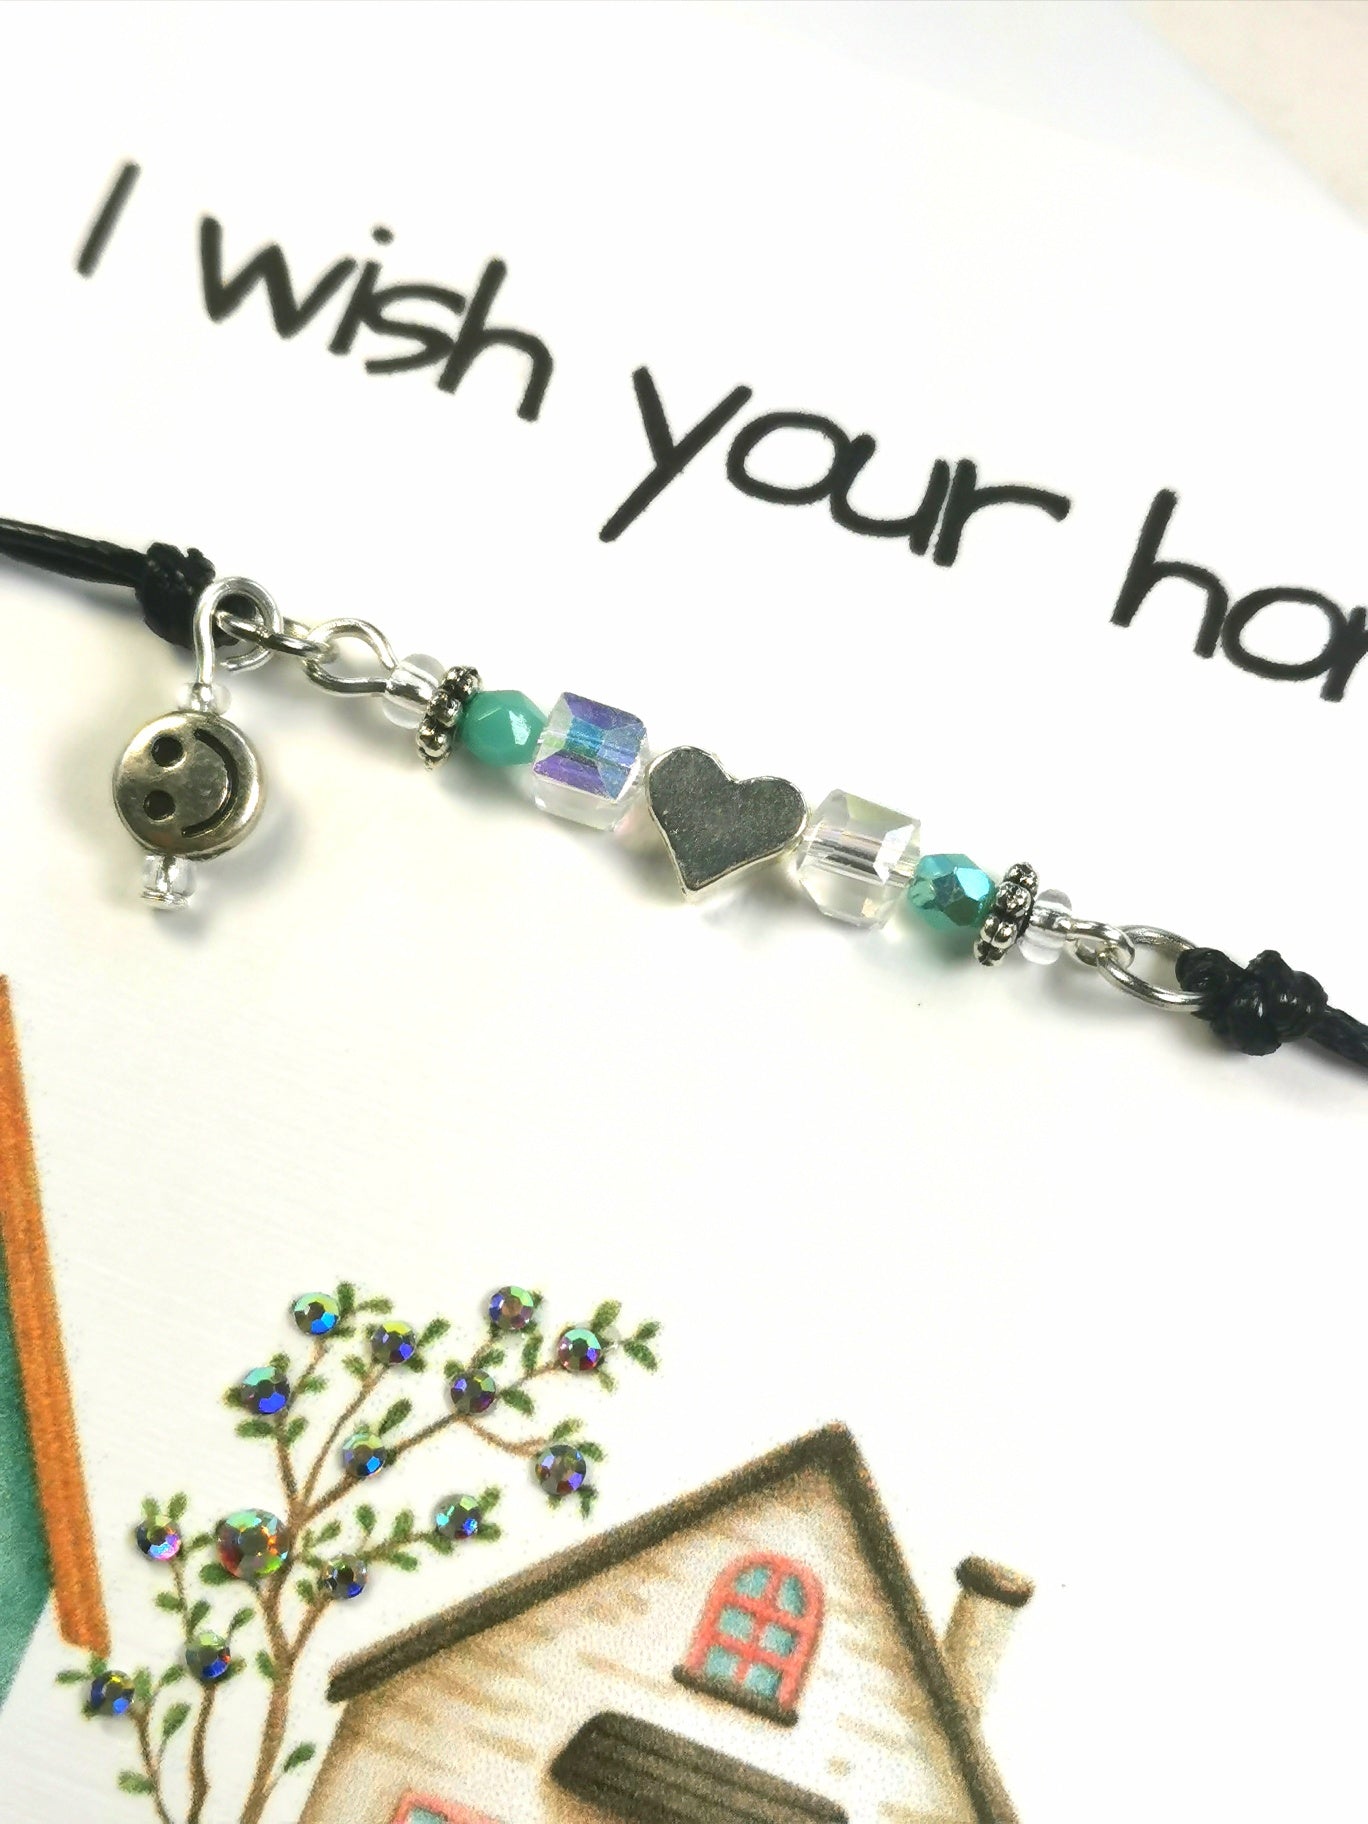 A Friendship Bracelet gift Card | I Wish Your home was connected to mine with a secret underground tunnel